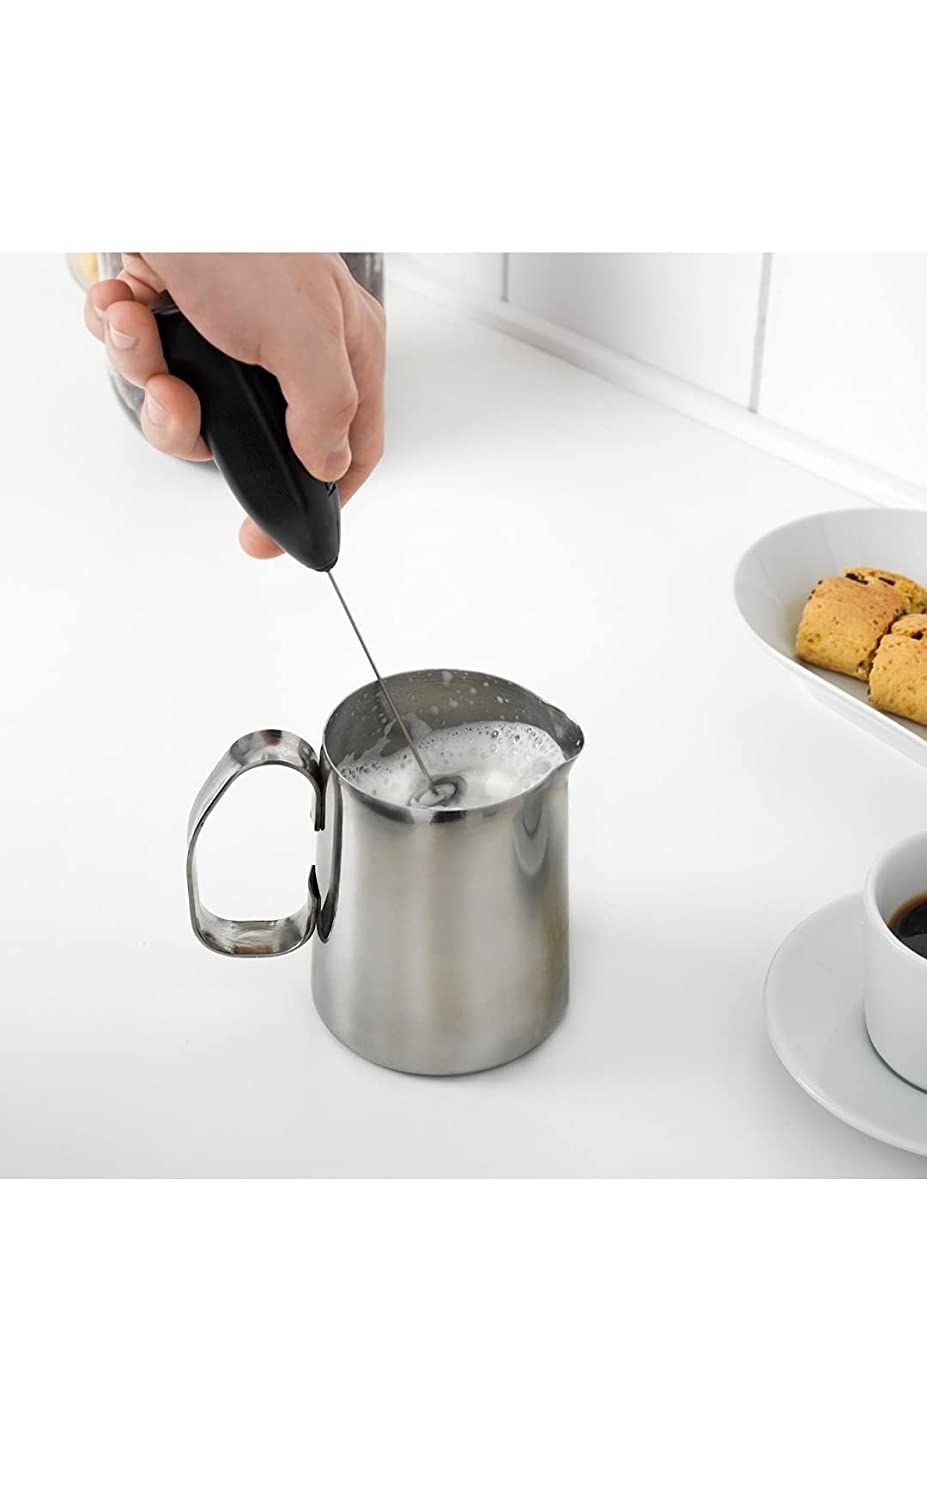 A person frothing milk in a milk frother